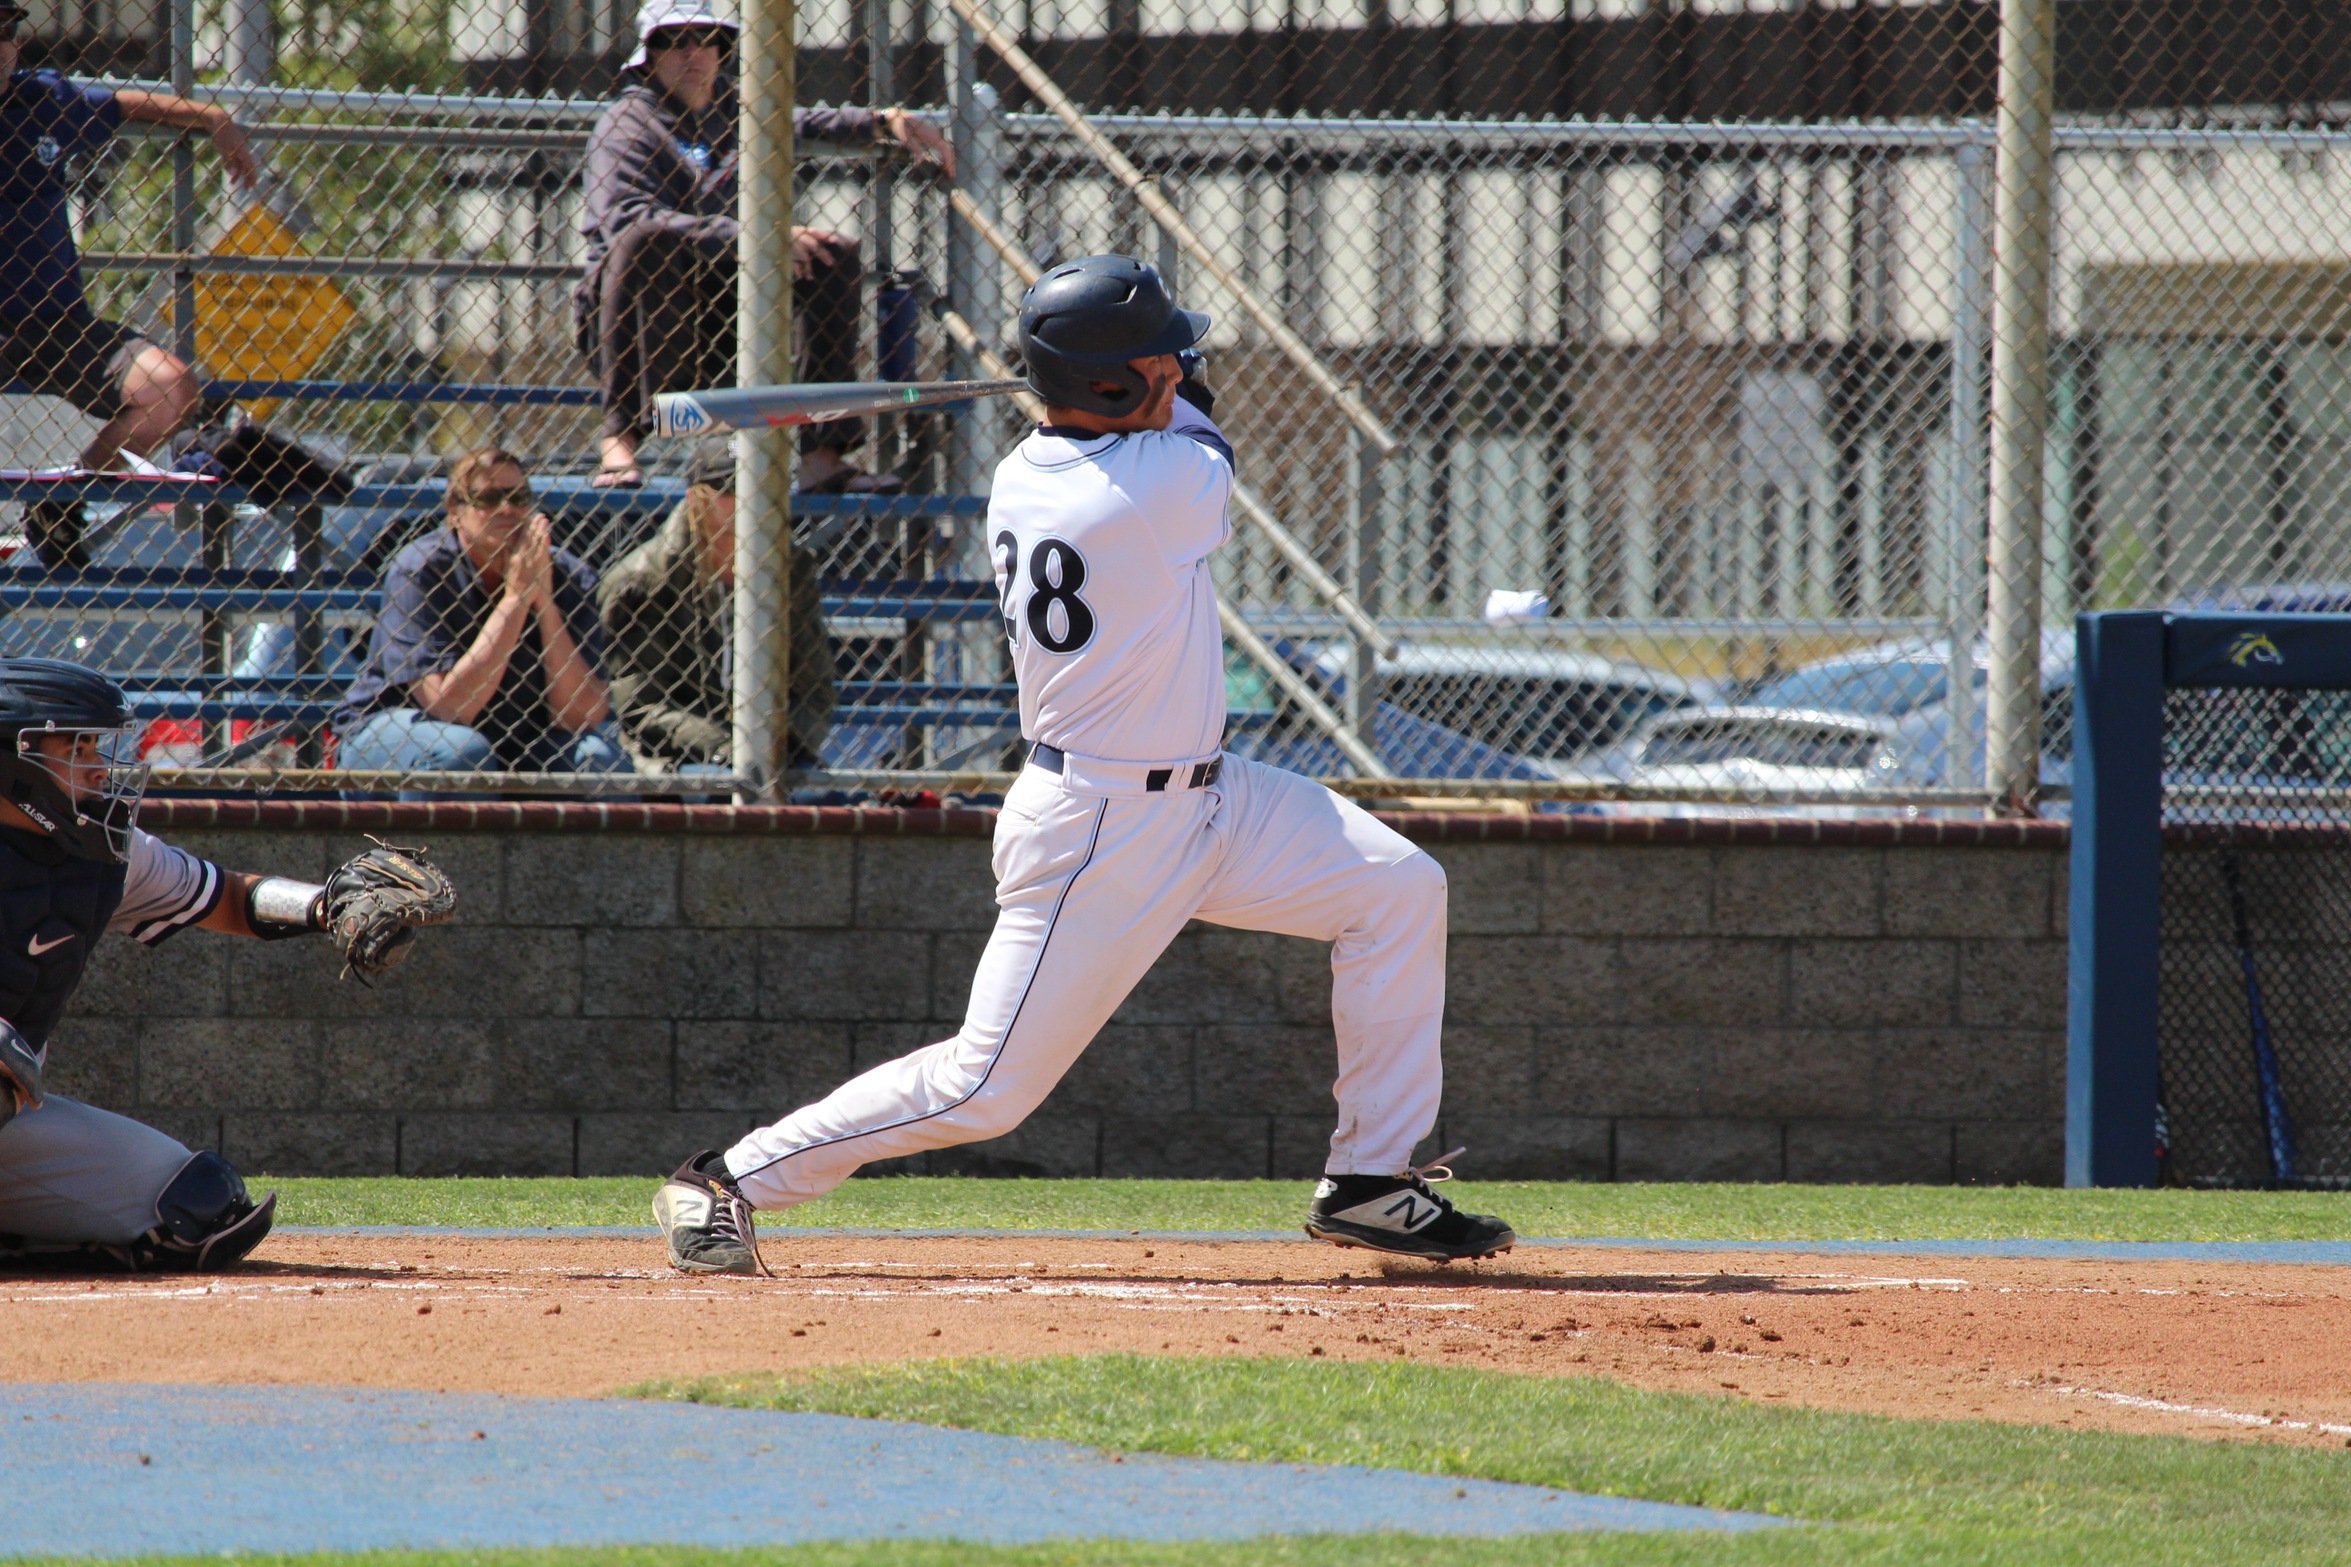 Cypress Edges Out Irvine Valley 7-6 in Series Opener